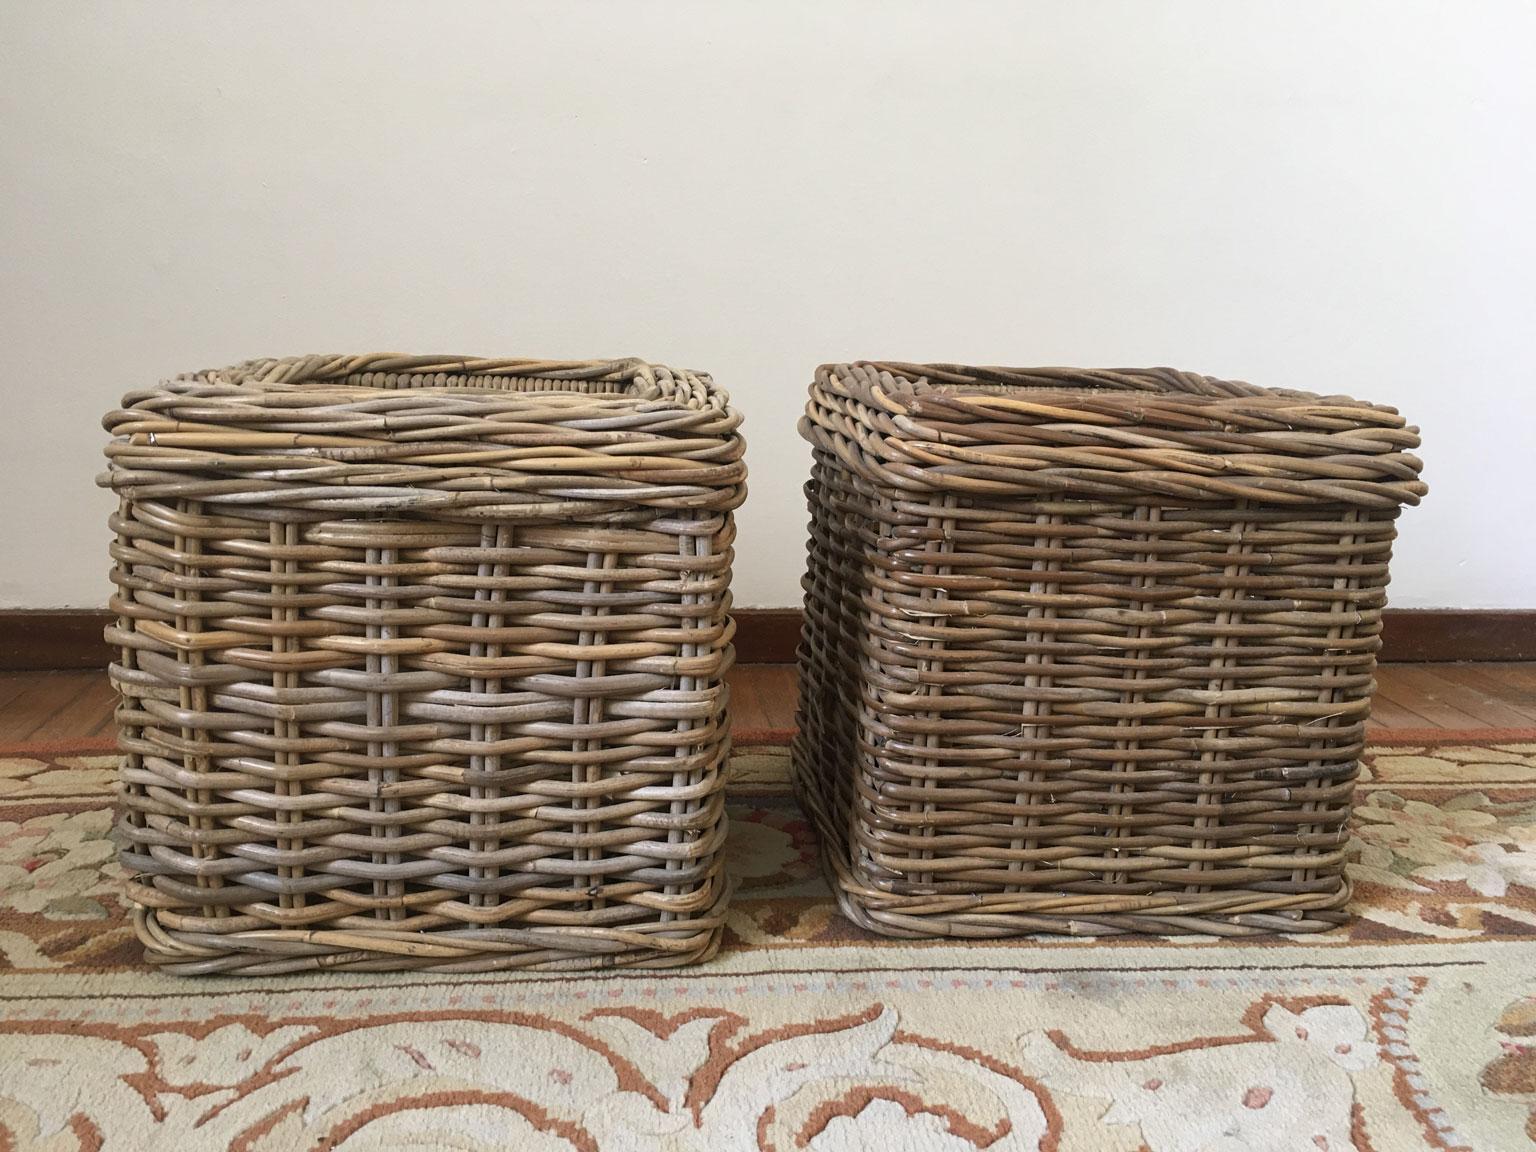 These rattan baskets have a metal box inside, to protect the natural materials from water and of topsoil of the plants. They can be useful for many use in your kitchen or living room, to contain fire wood also.
The natural color of the rattan is